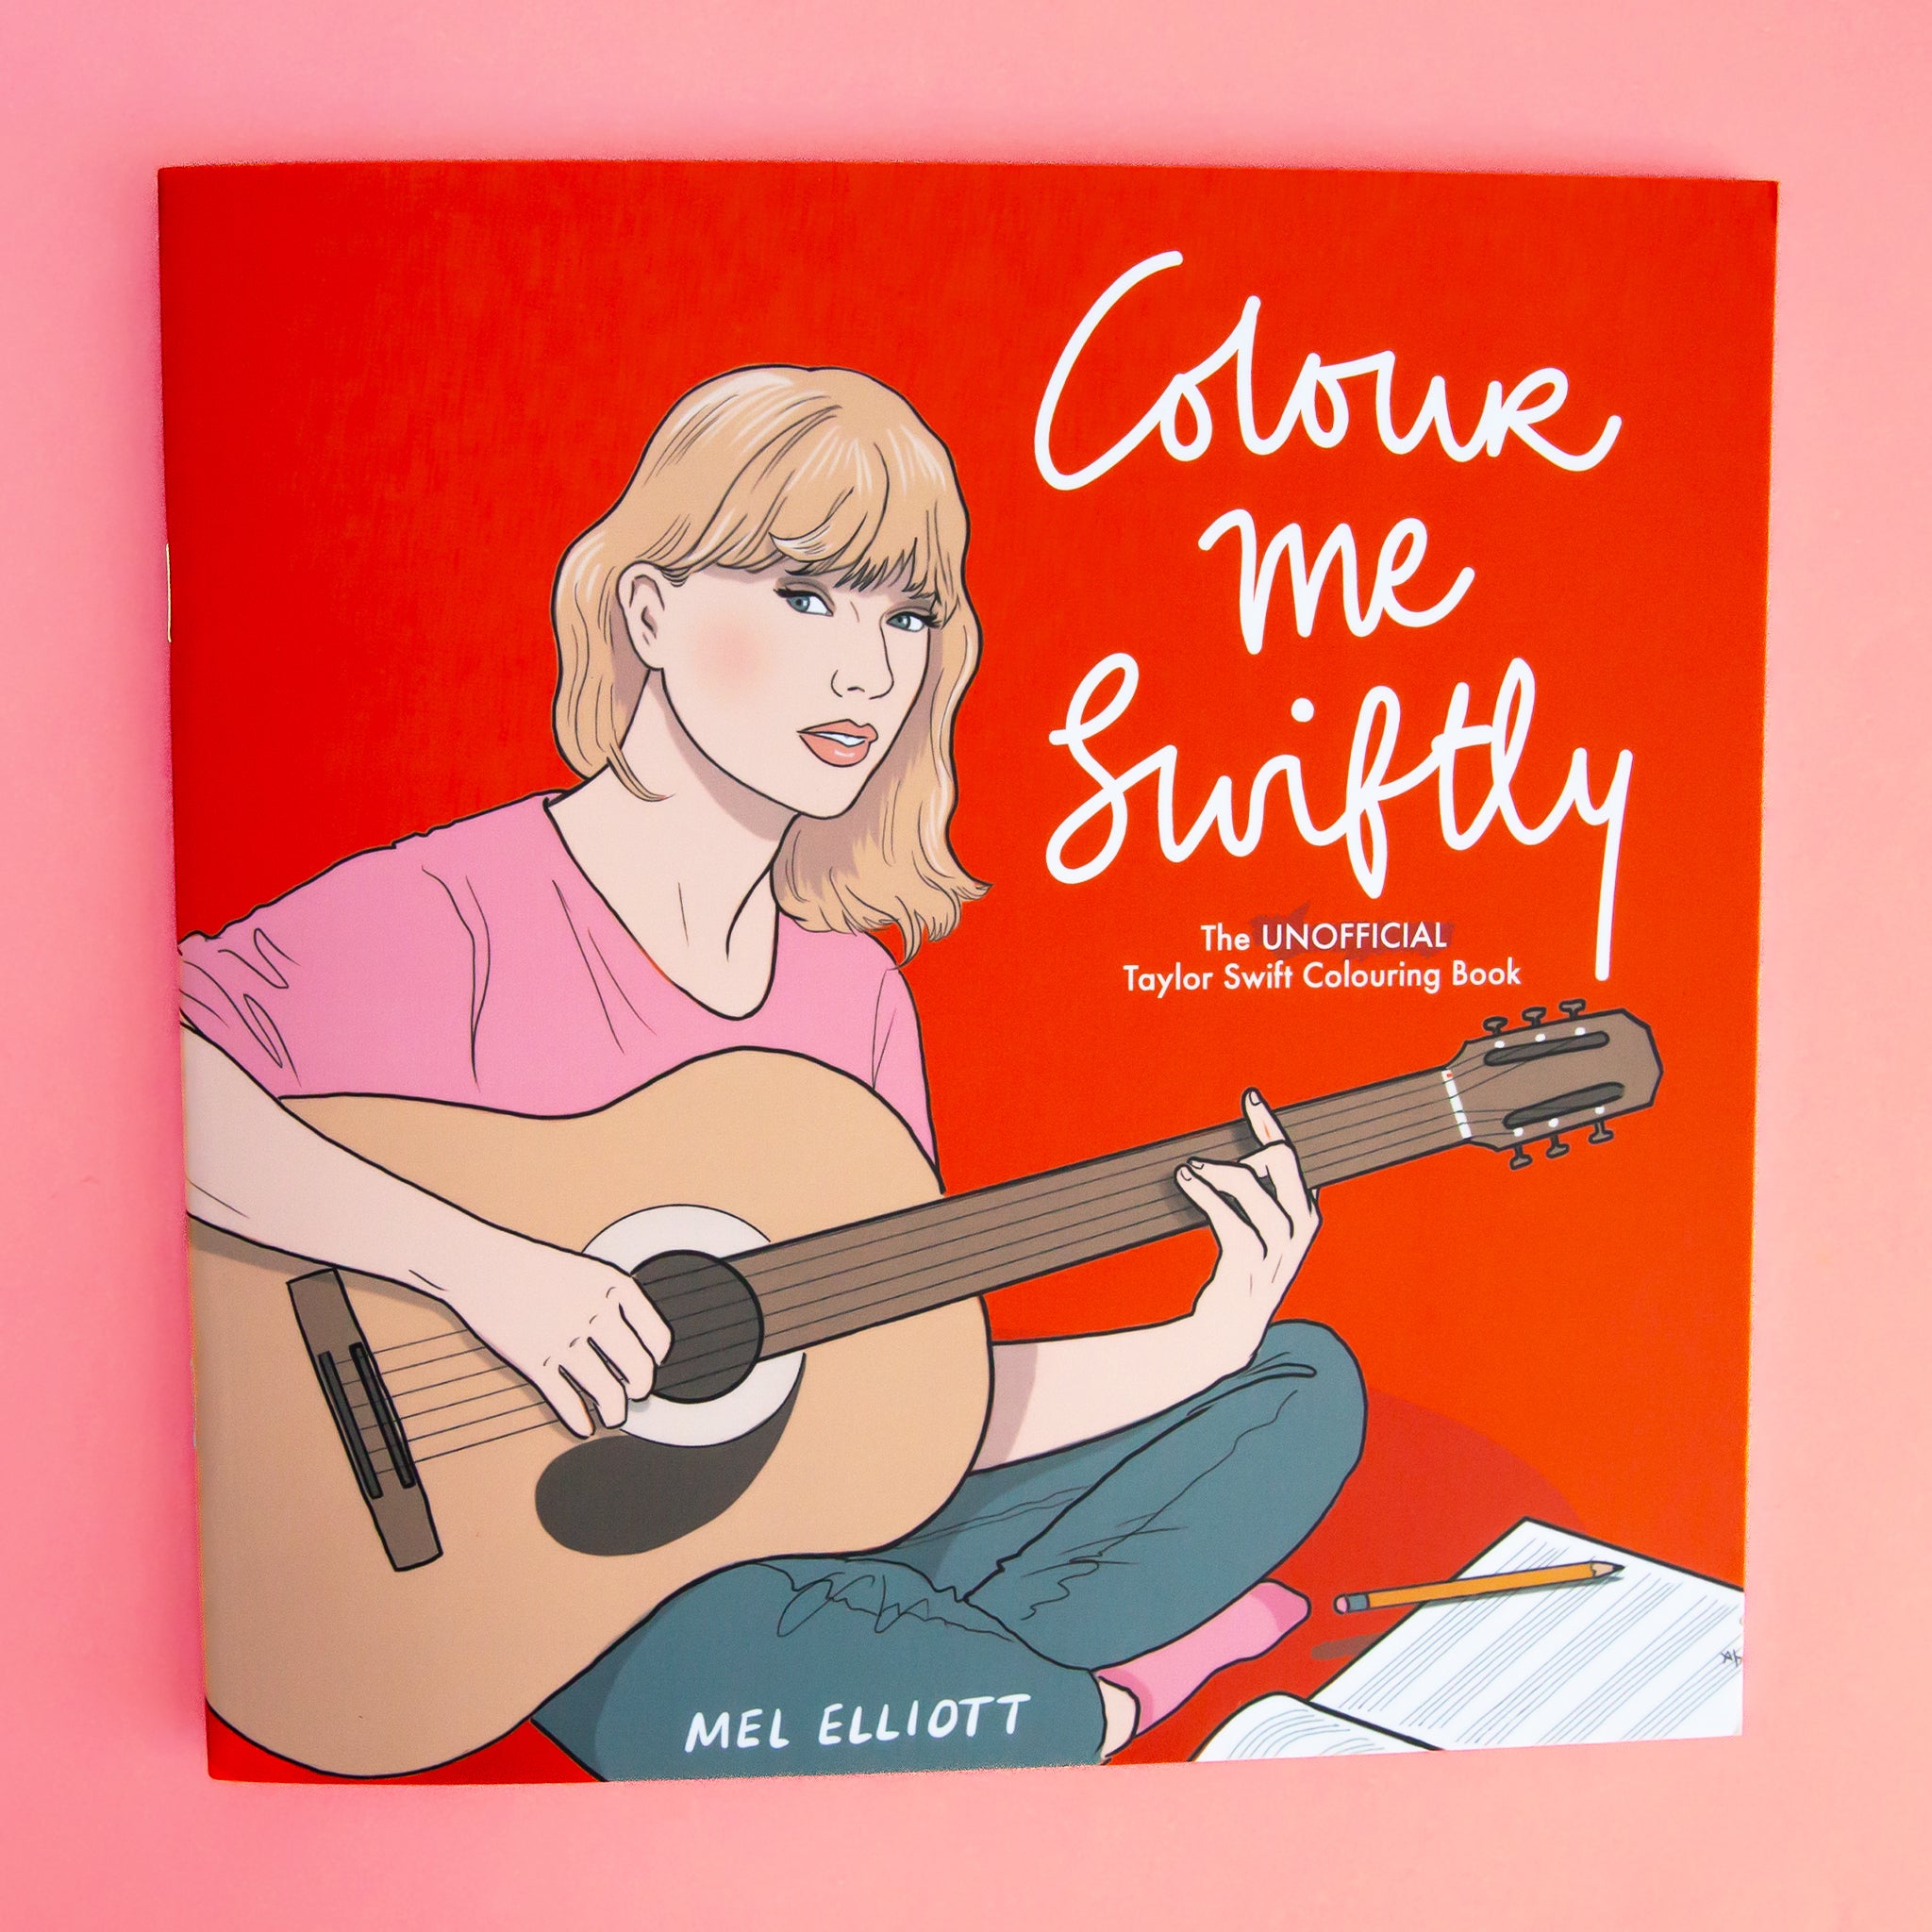 On a pink background is a red book with an illustration of Taylor Swift with a guitar and the white title on the right that reads, &quot;Colour me Swiftly The Unofficial Taylor Swift Colouring Book&quot;.